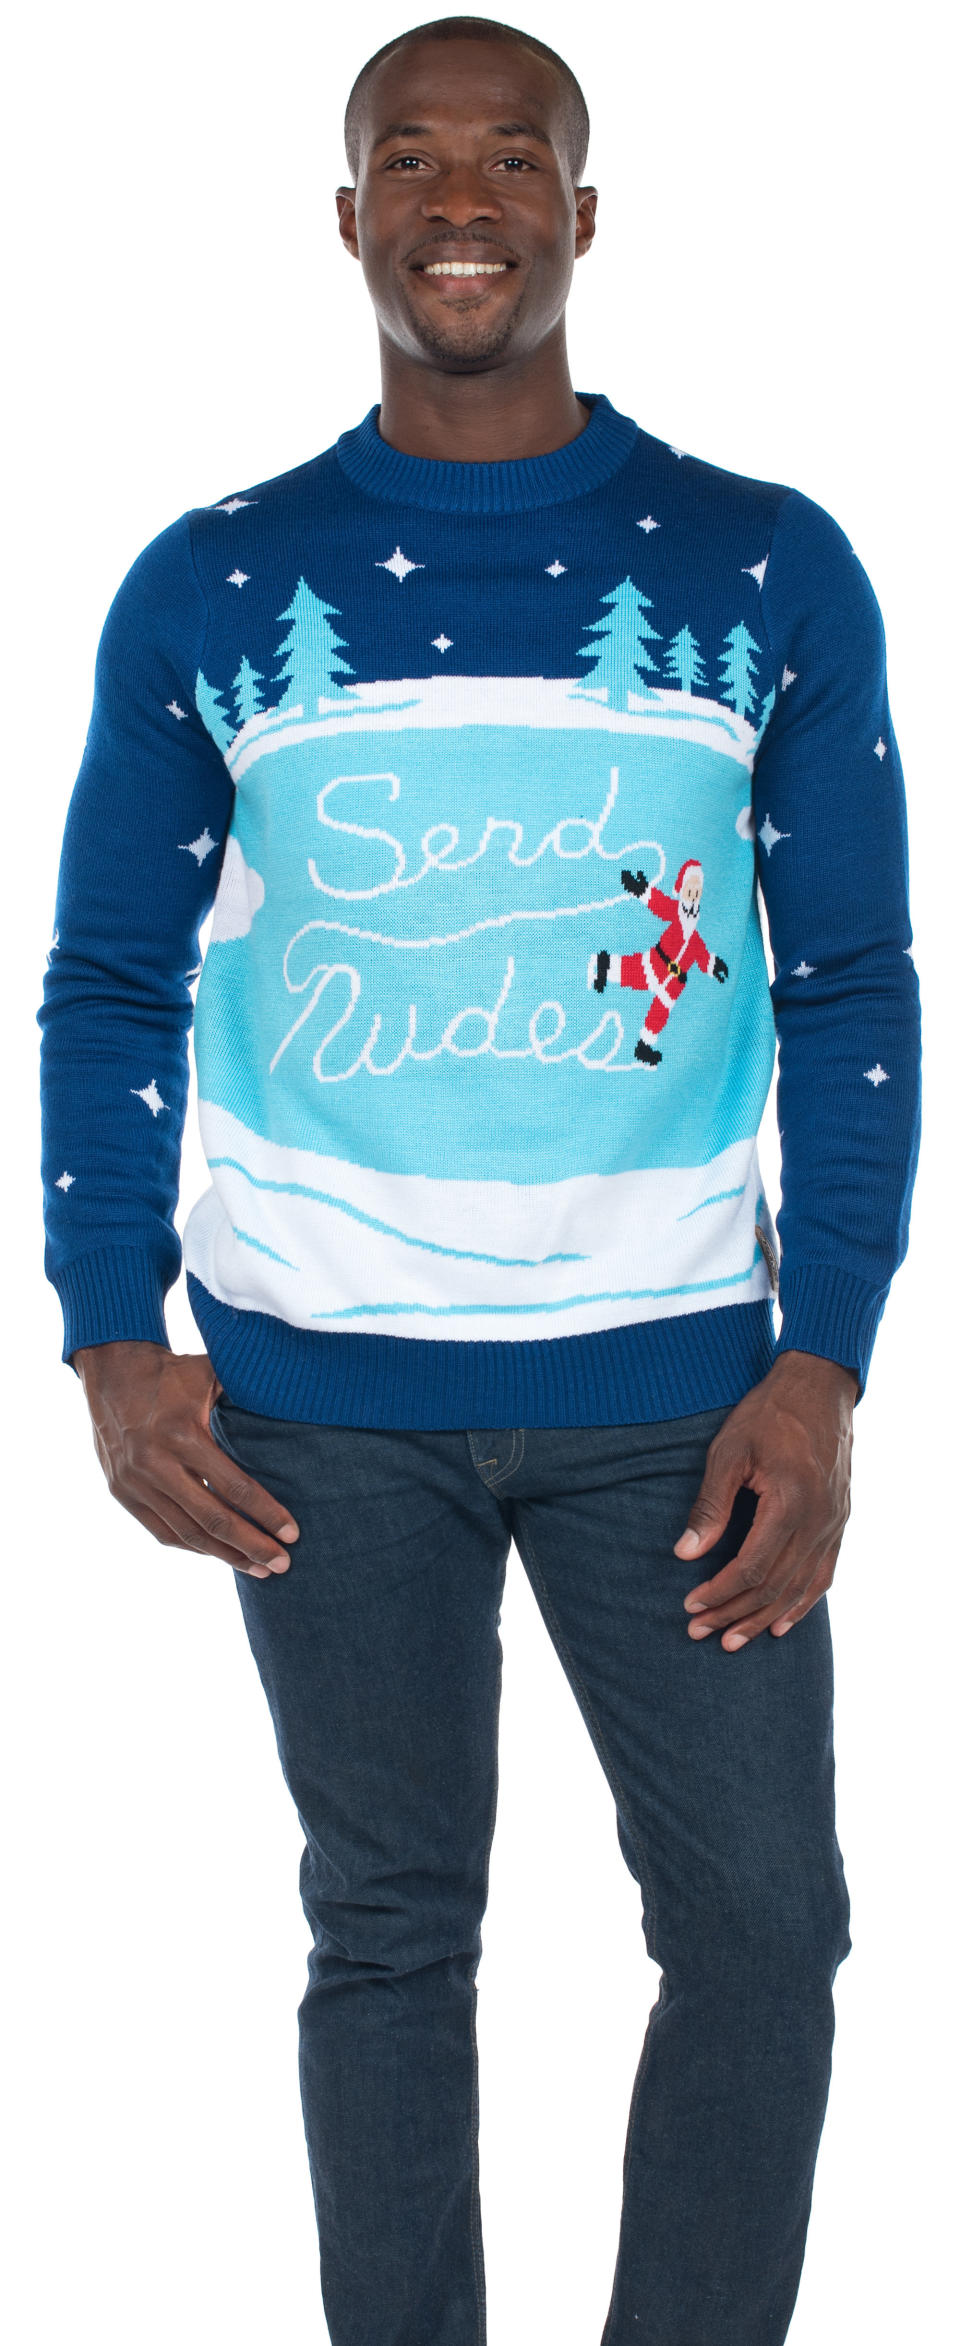 <a href="https://www.tipsyelves.com/mens-send-nudes-christmas-sweaters" target="_blank">This probably seemed a lot funnier</a> back in the summer before all the allegations and accusations of sexual harassment started. It certainly seems uglier than the other ugly Christmas sweaters.